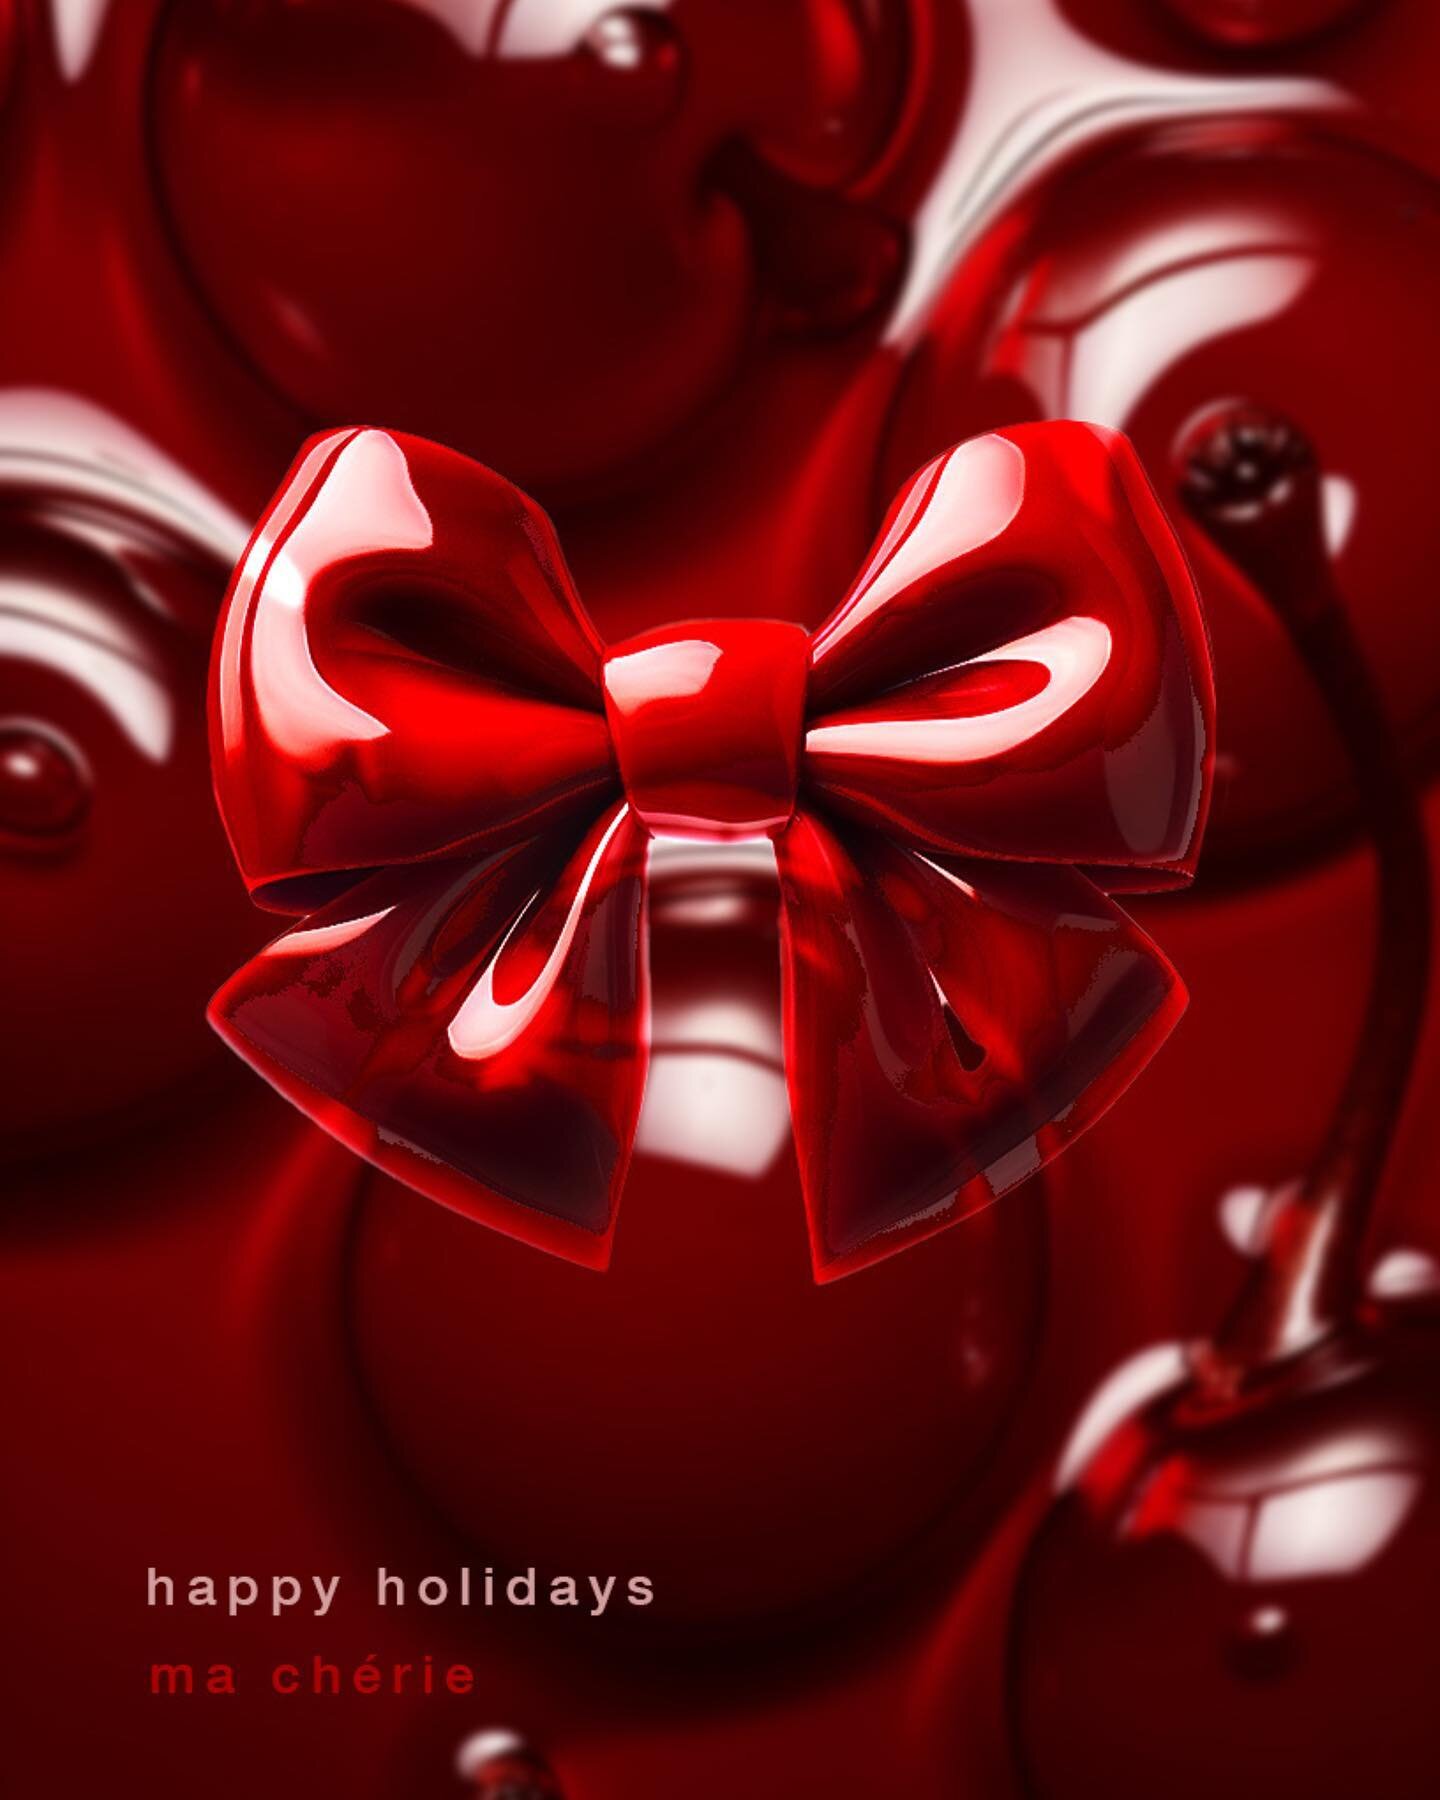 💌🍒 🎀 happy holidays🎀 🍒💌

trends on trends 
ribbons made of
- cherry 🍒 
- candy cane (red white stripes)💌
- gingerbread 🍪